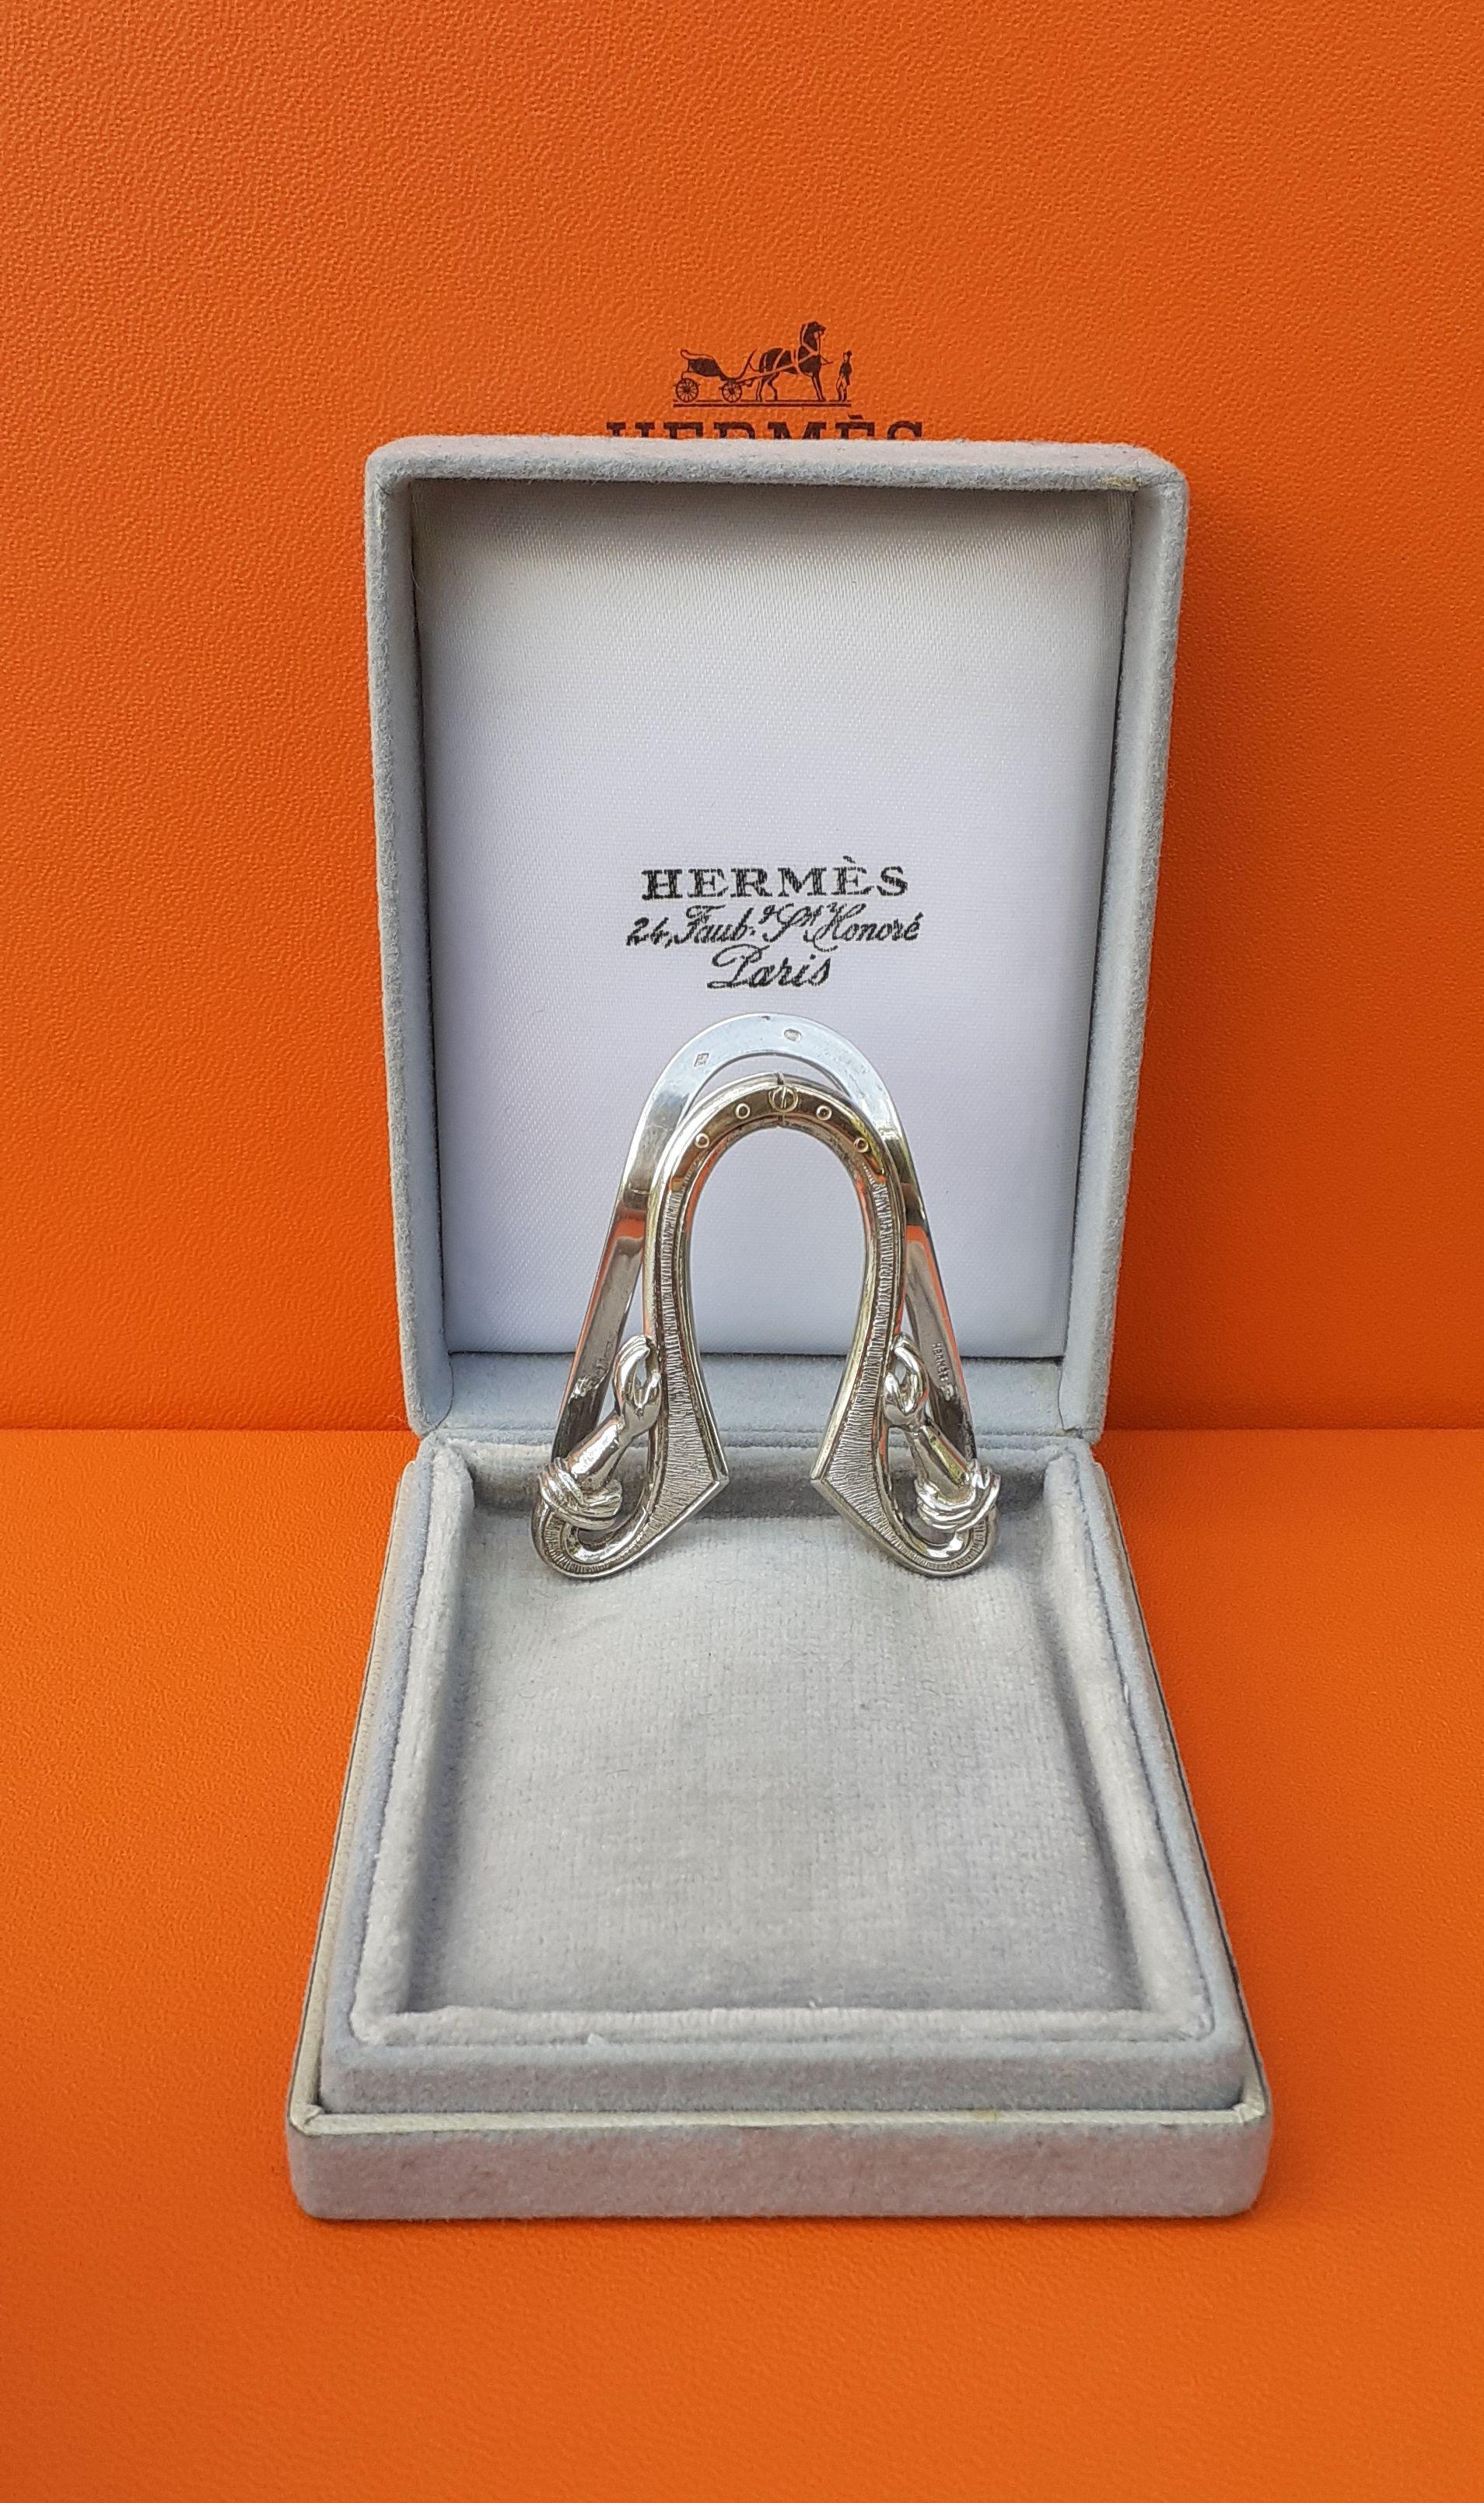 Hermès Vintage Money Clip Horseshoe and Hands Shaped in Silver 8